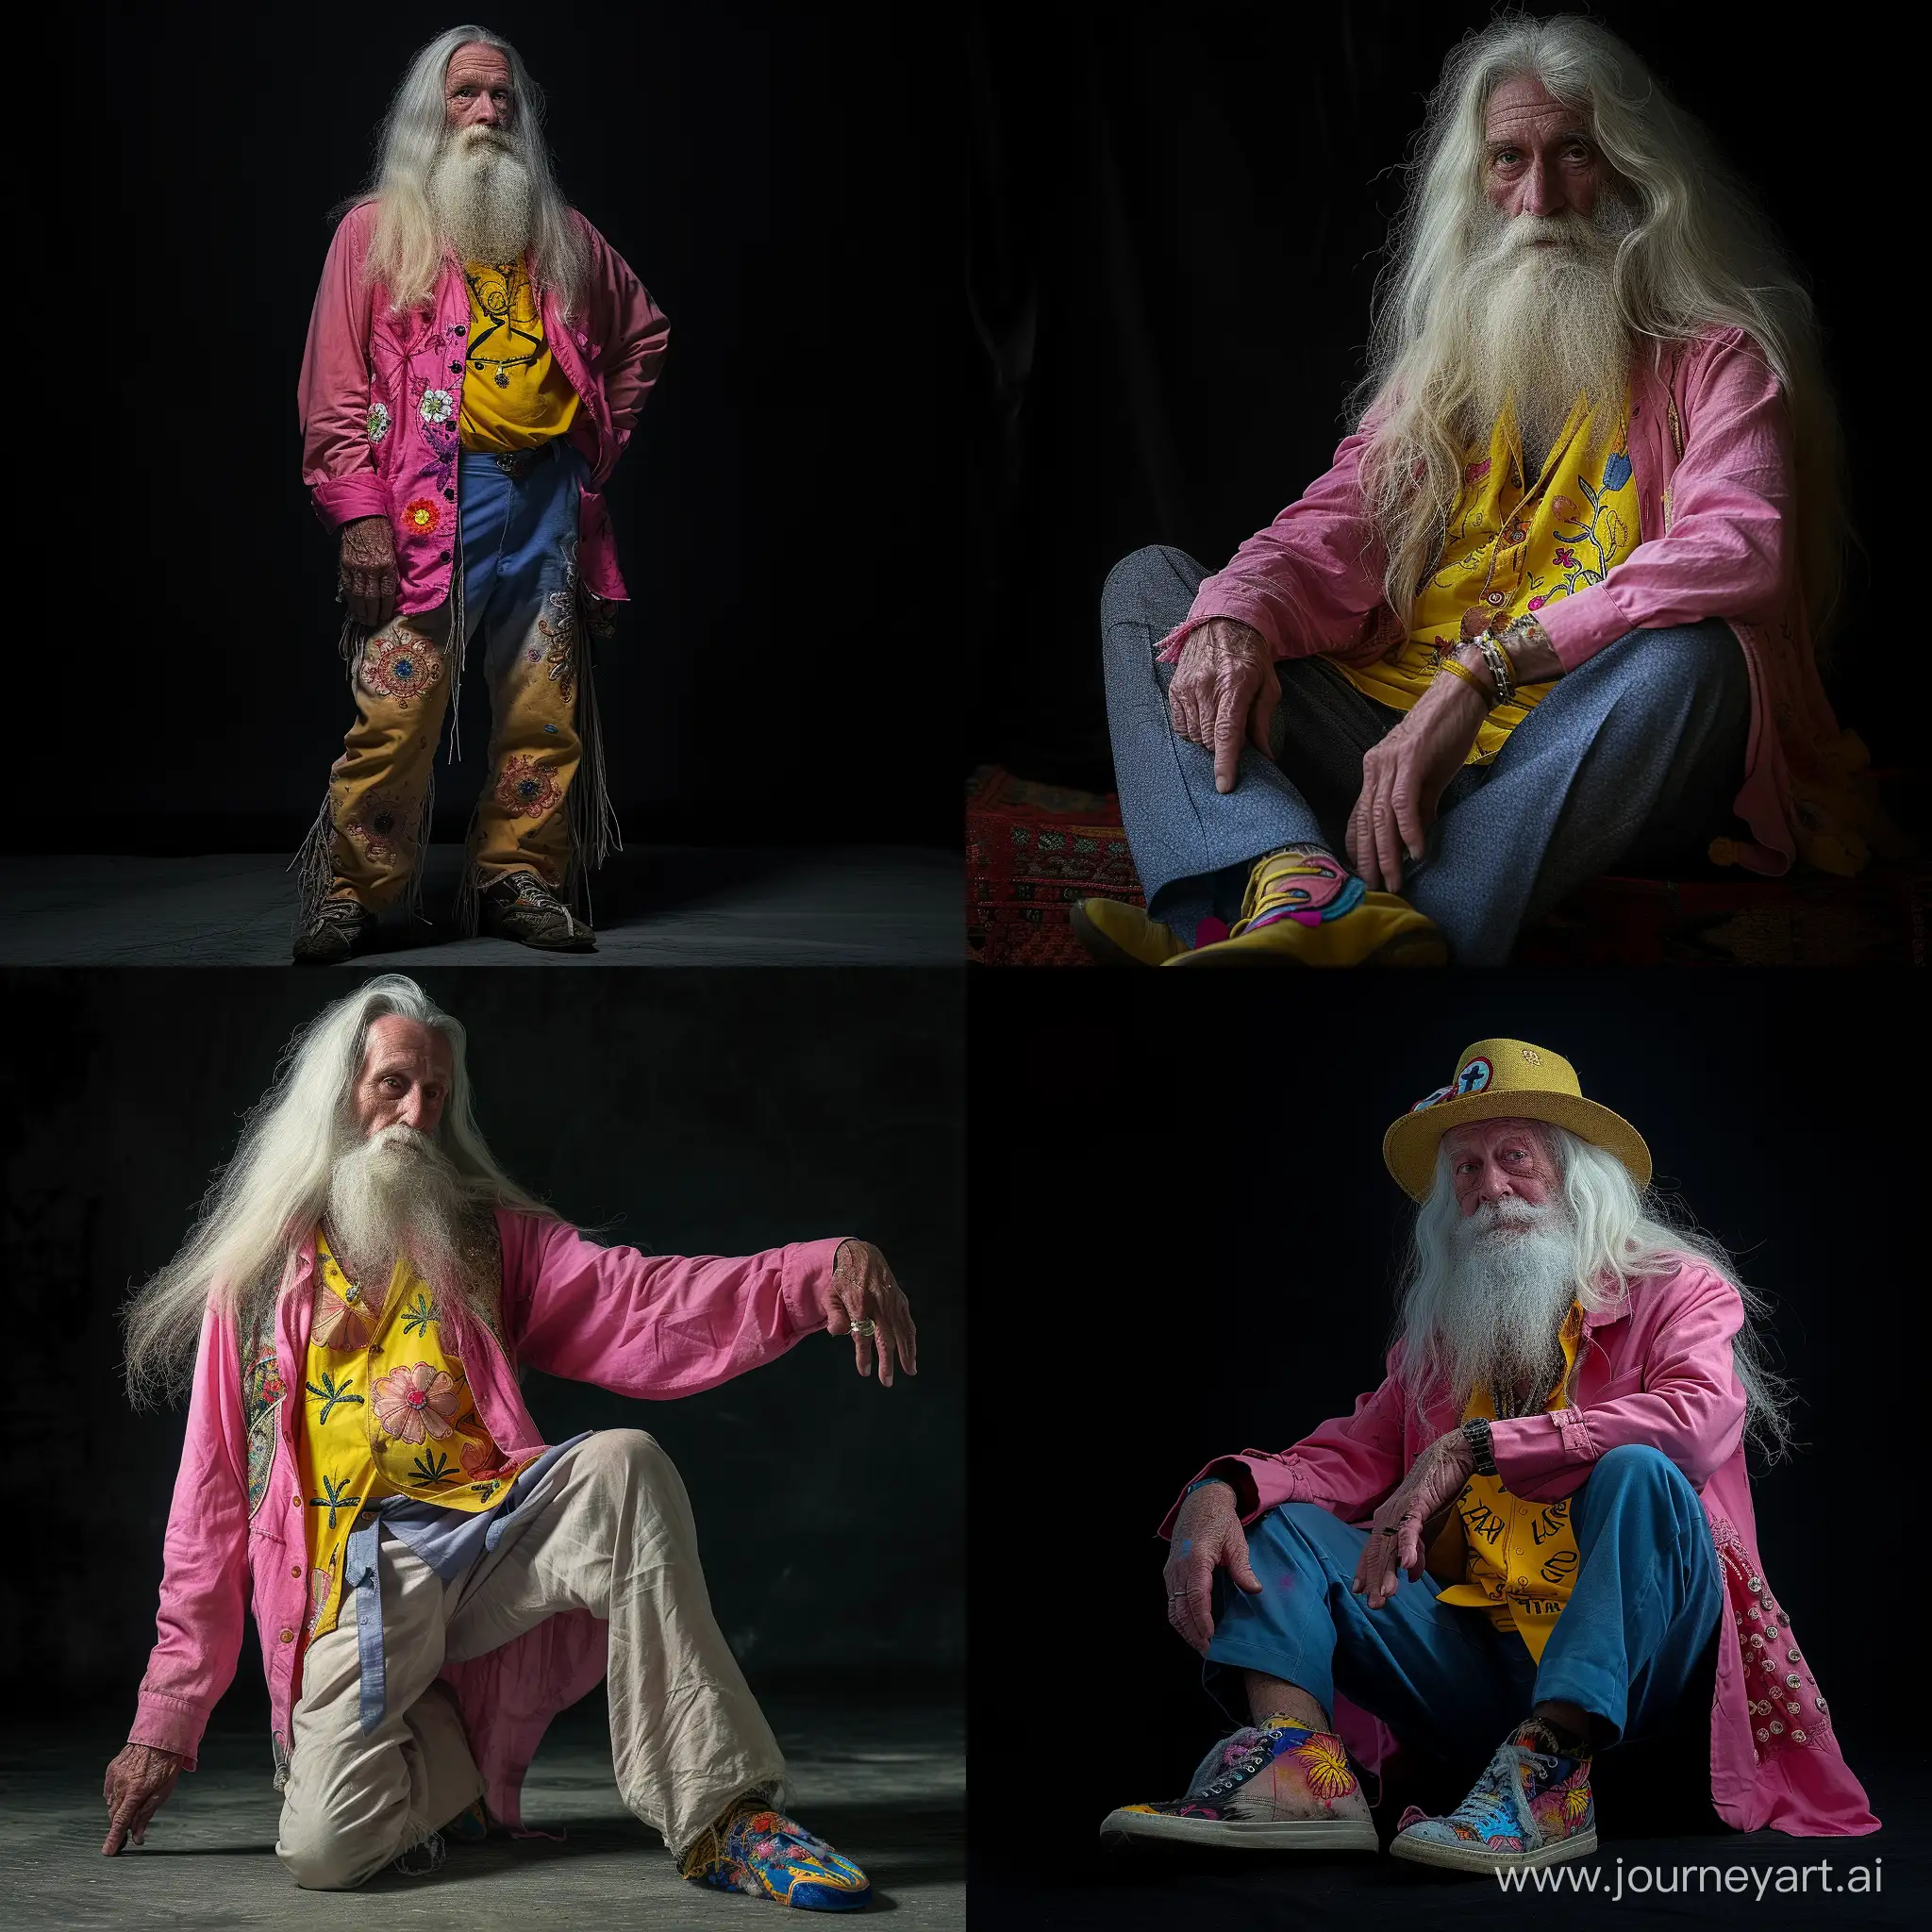 dark 90 years old   hippie men white longhair  in  a tale and long beard wearing a pink  jack and yellow shirt and bleu trouser   shoes with flower design     background black   light and low contrast  low angle 50mm fujixt4   fotorealistisch 